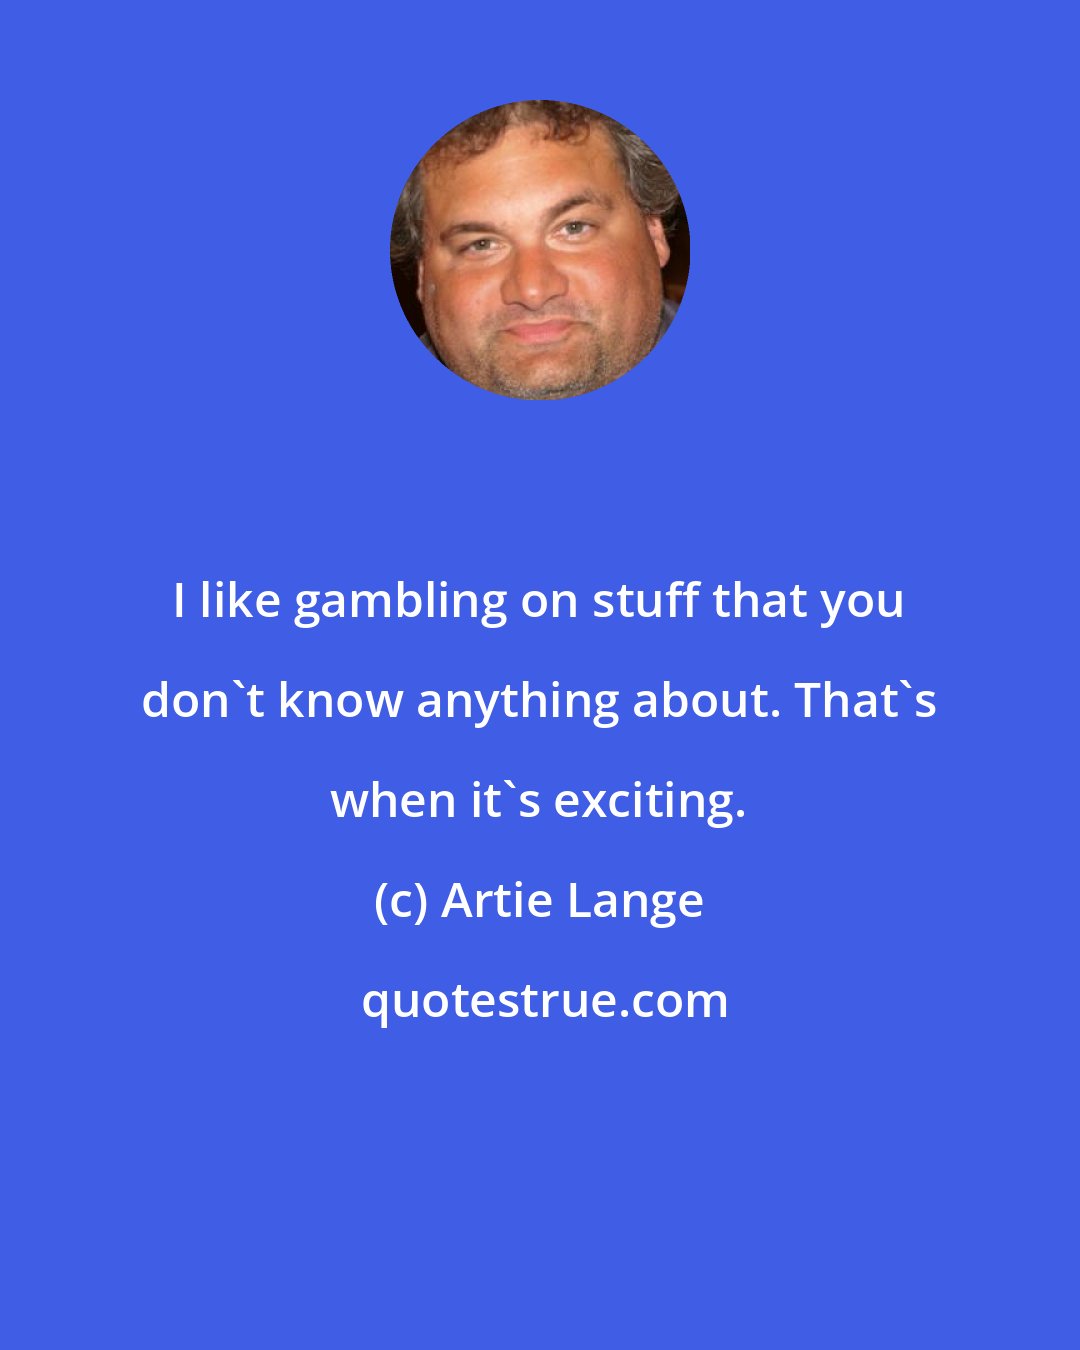 Artie Lange: I like gambling on stuff that you don't know anything about. That's when it's exciting.